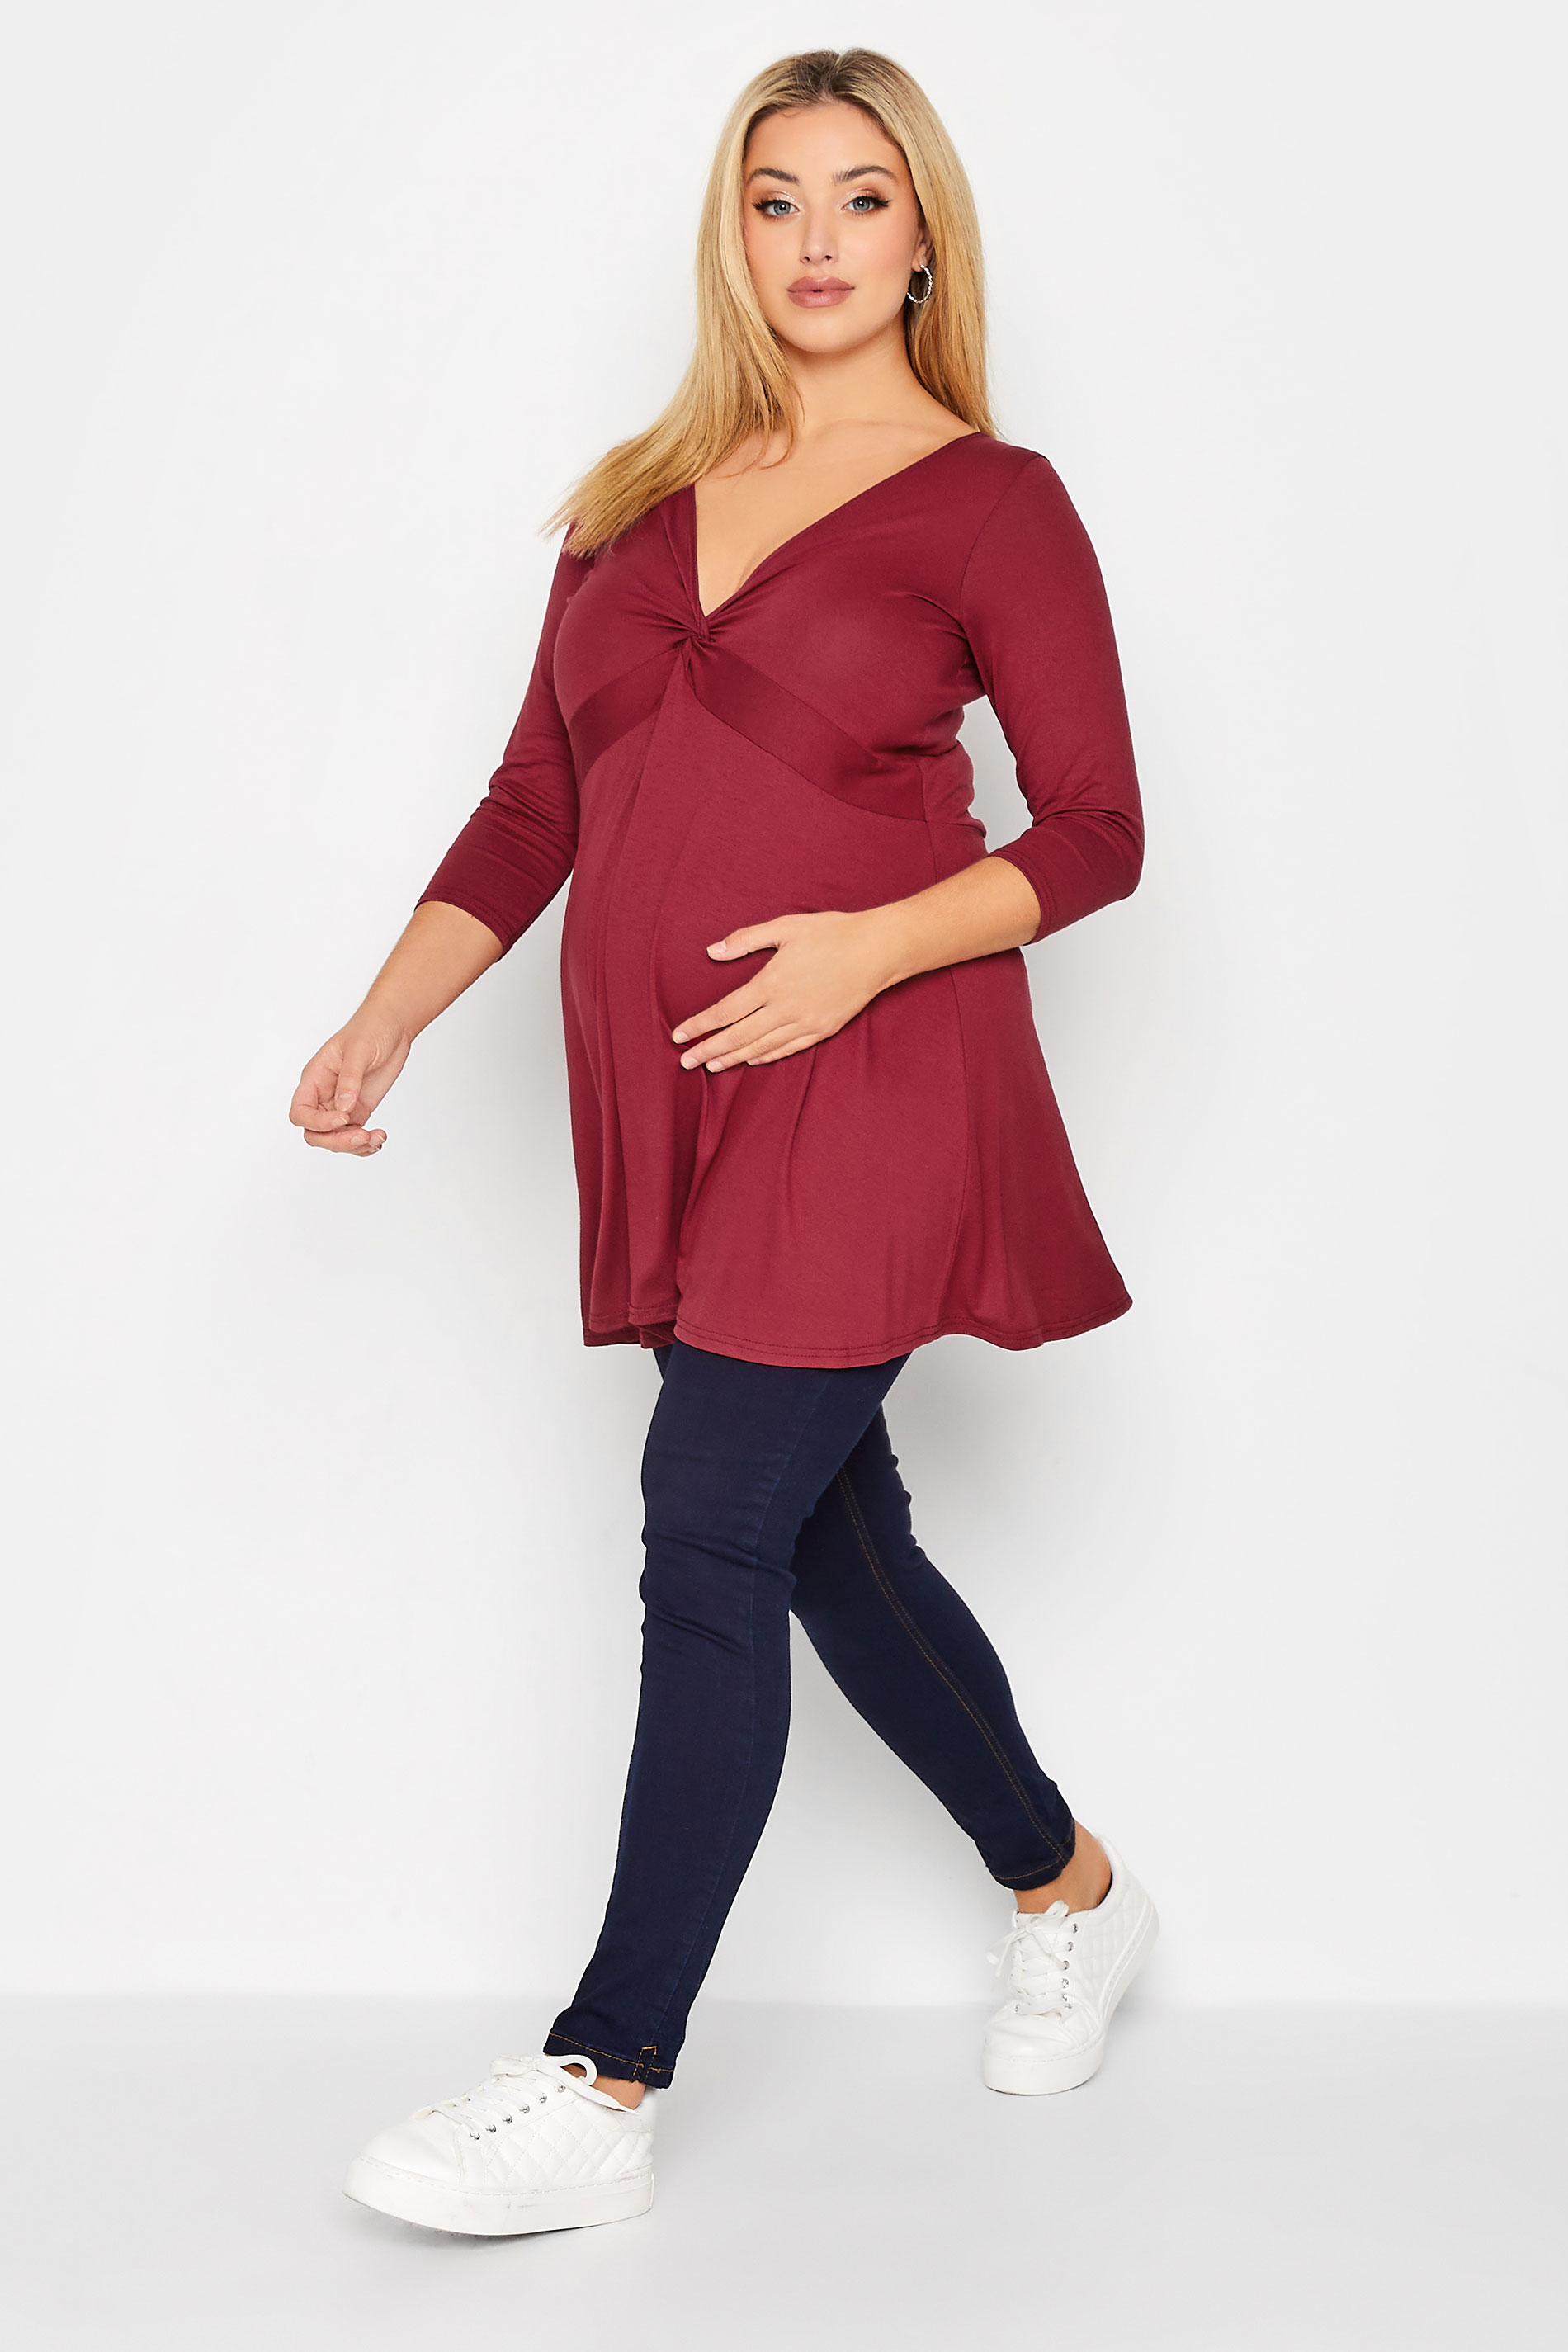 BUMP IT UP MATERNITY Plus Size Red Knot Top | Yours Clothing 2